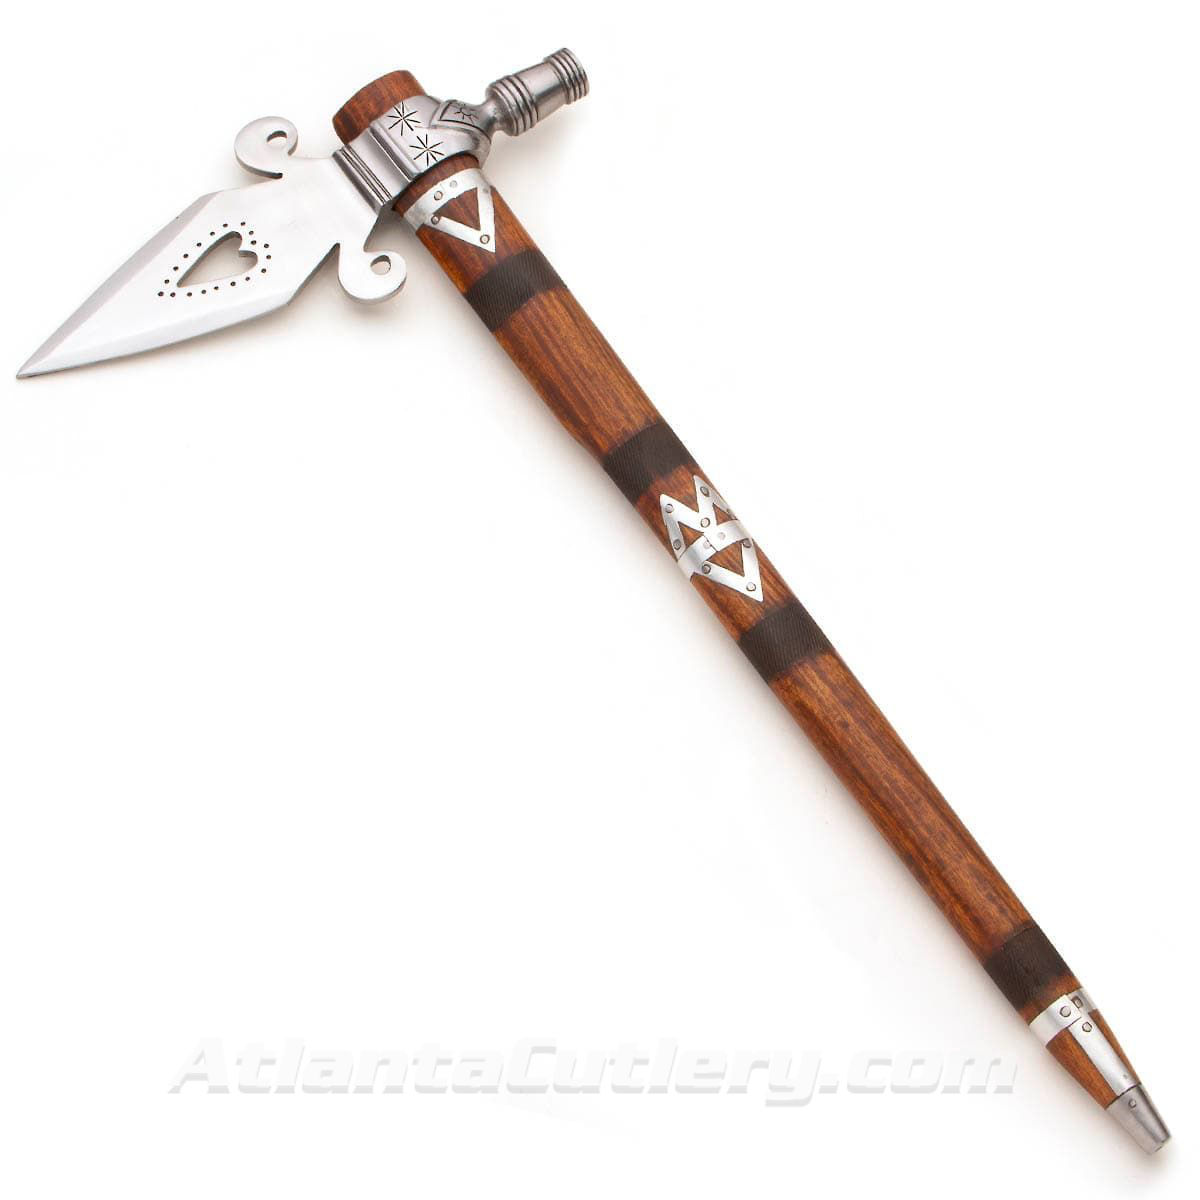 Spontoon Tomahawk with high carbon steel blade, wood handle with cross hatchinng and metal bands and fully functional pipe